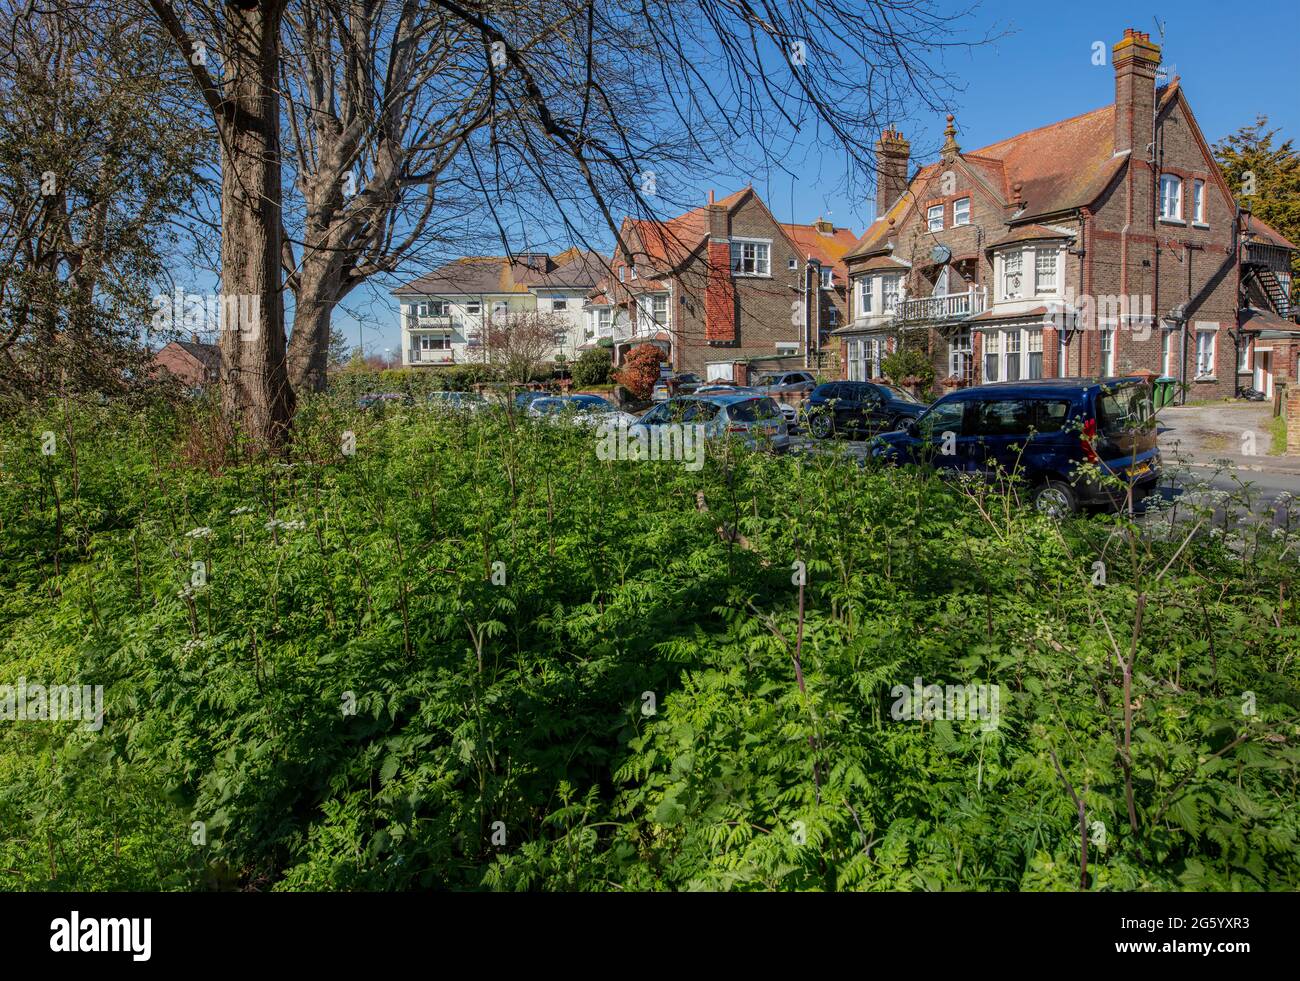 Lobb's Wood, Littlehampton; a view from the middle of the wood, through trees and bushes over to Edwardian red brick houses on Granville Road Stock Photo